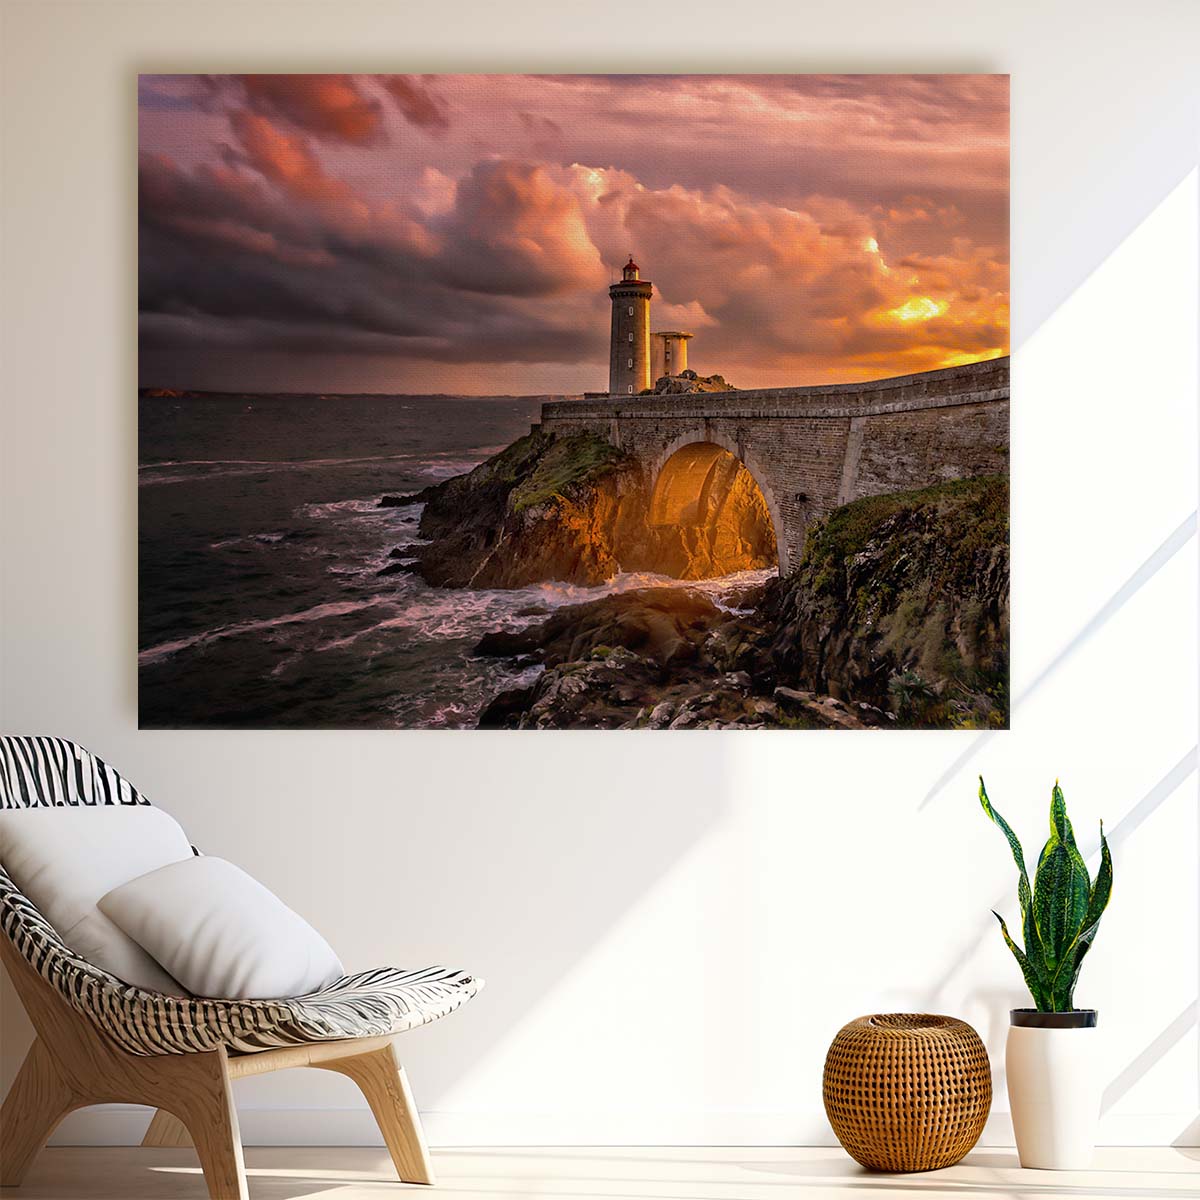 Golden Sunset Lighthouse Seascape Wall Art by Luxuriance Designs. Made in USA.